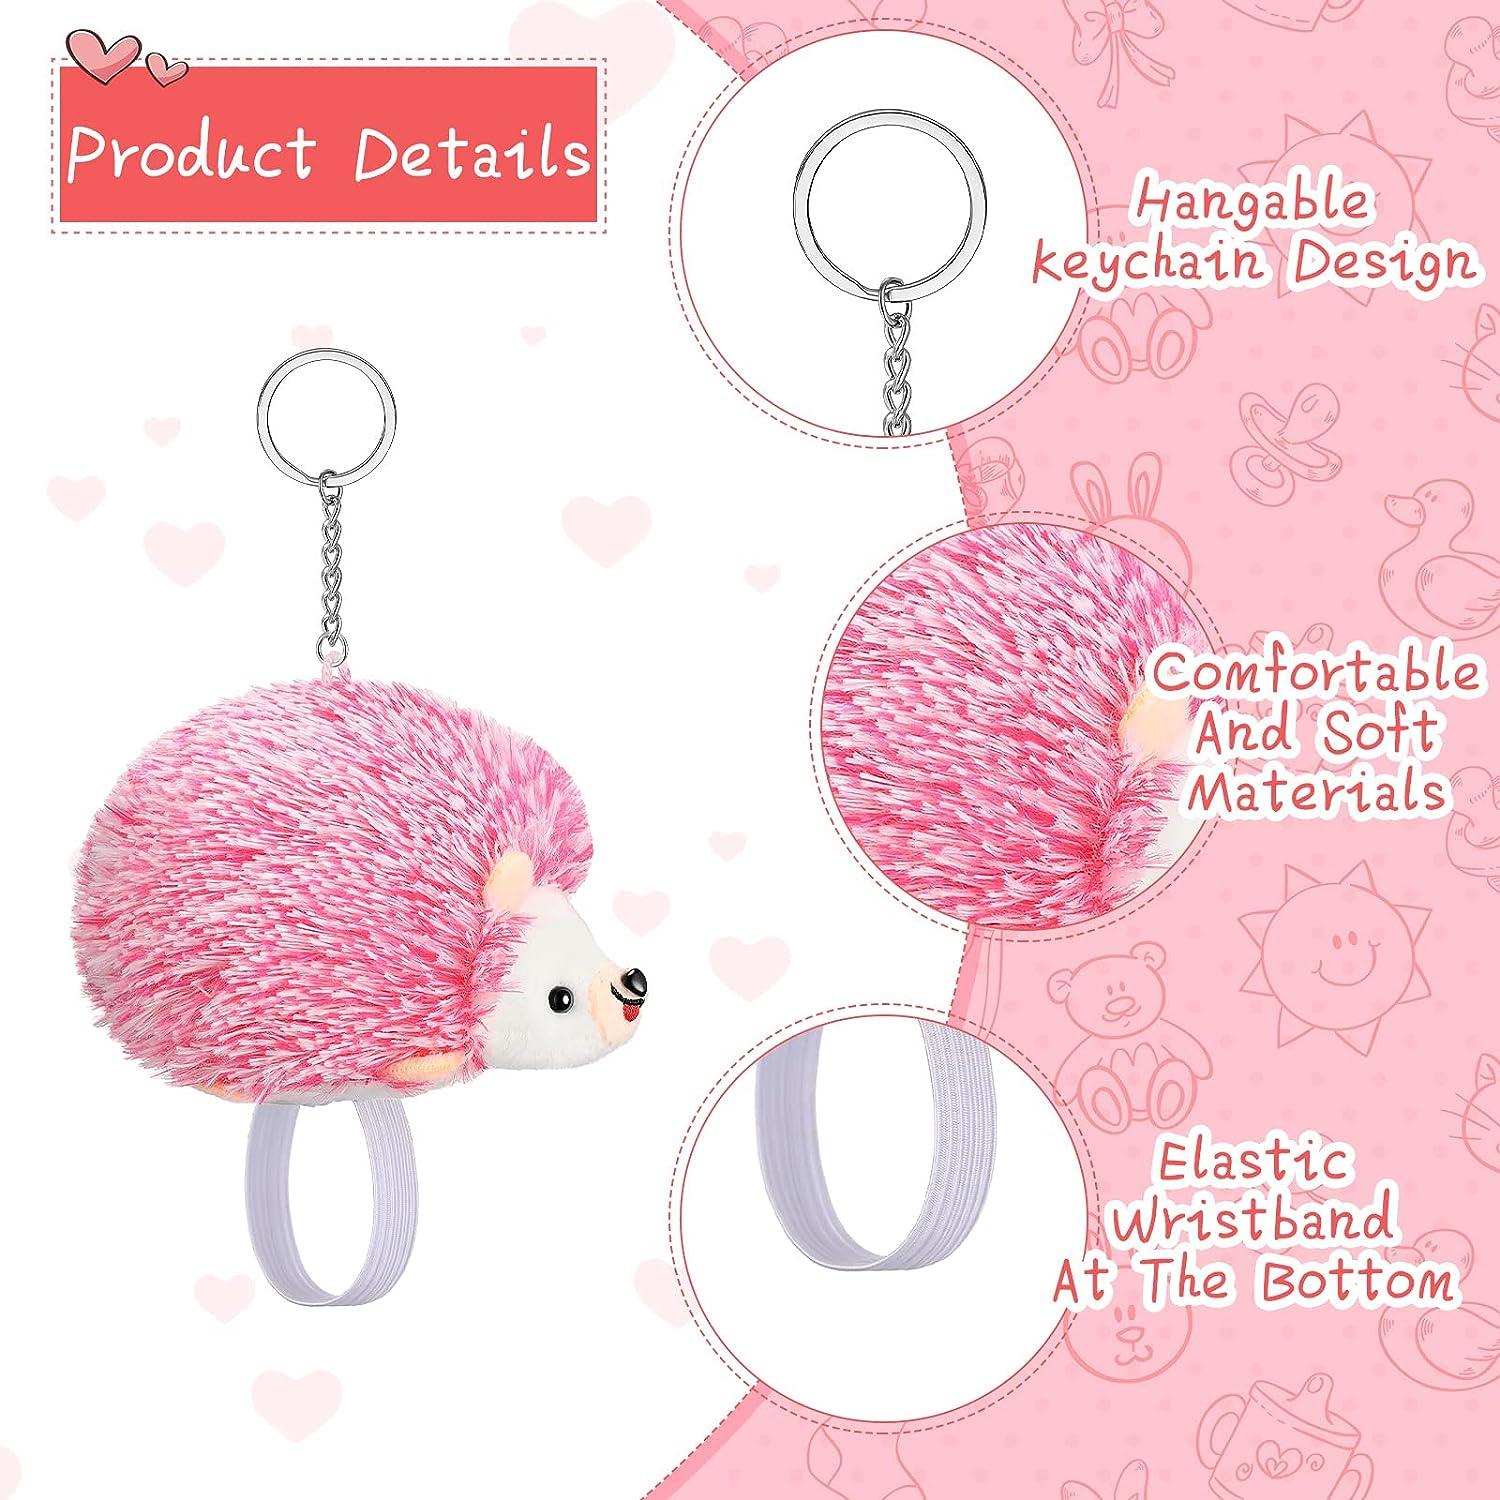 Pin Cushions for Sewing Cute Patchwork Pin Holder 2pcs DIY Craft Hedgehog